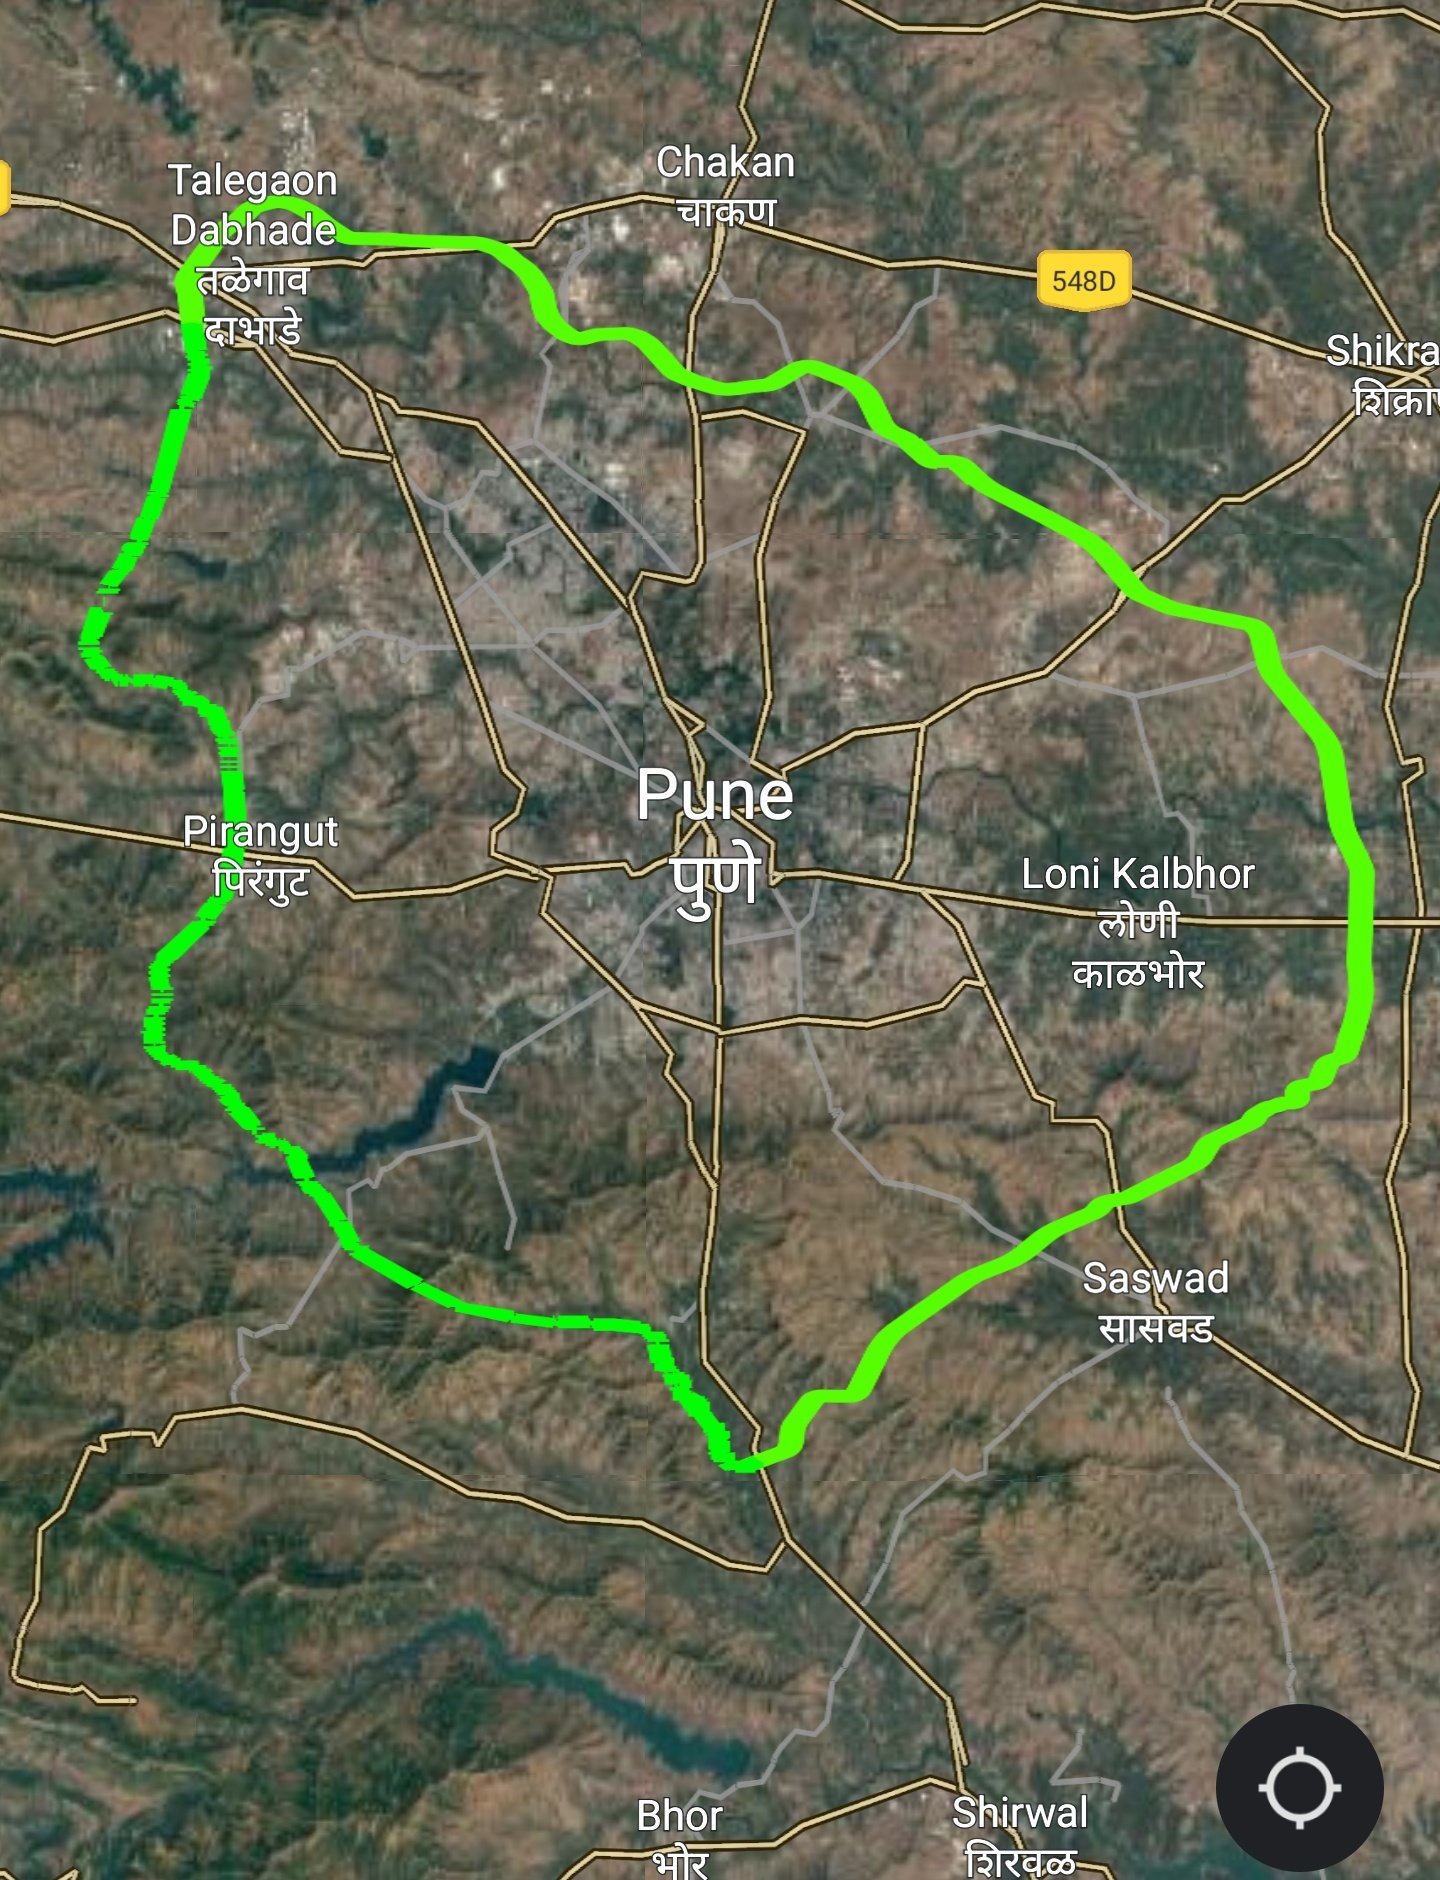 Pune Ring Road: Map, Route, Funding, And Latest News